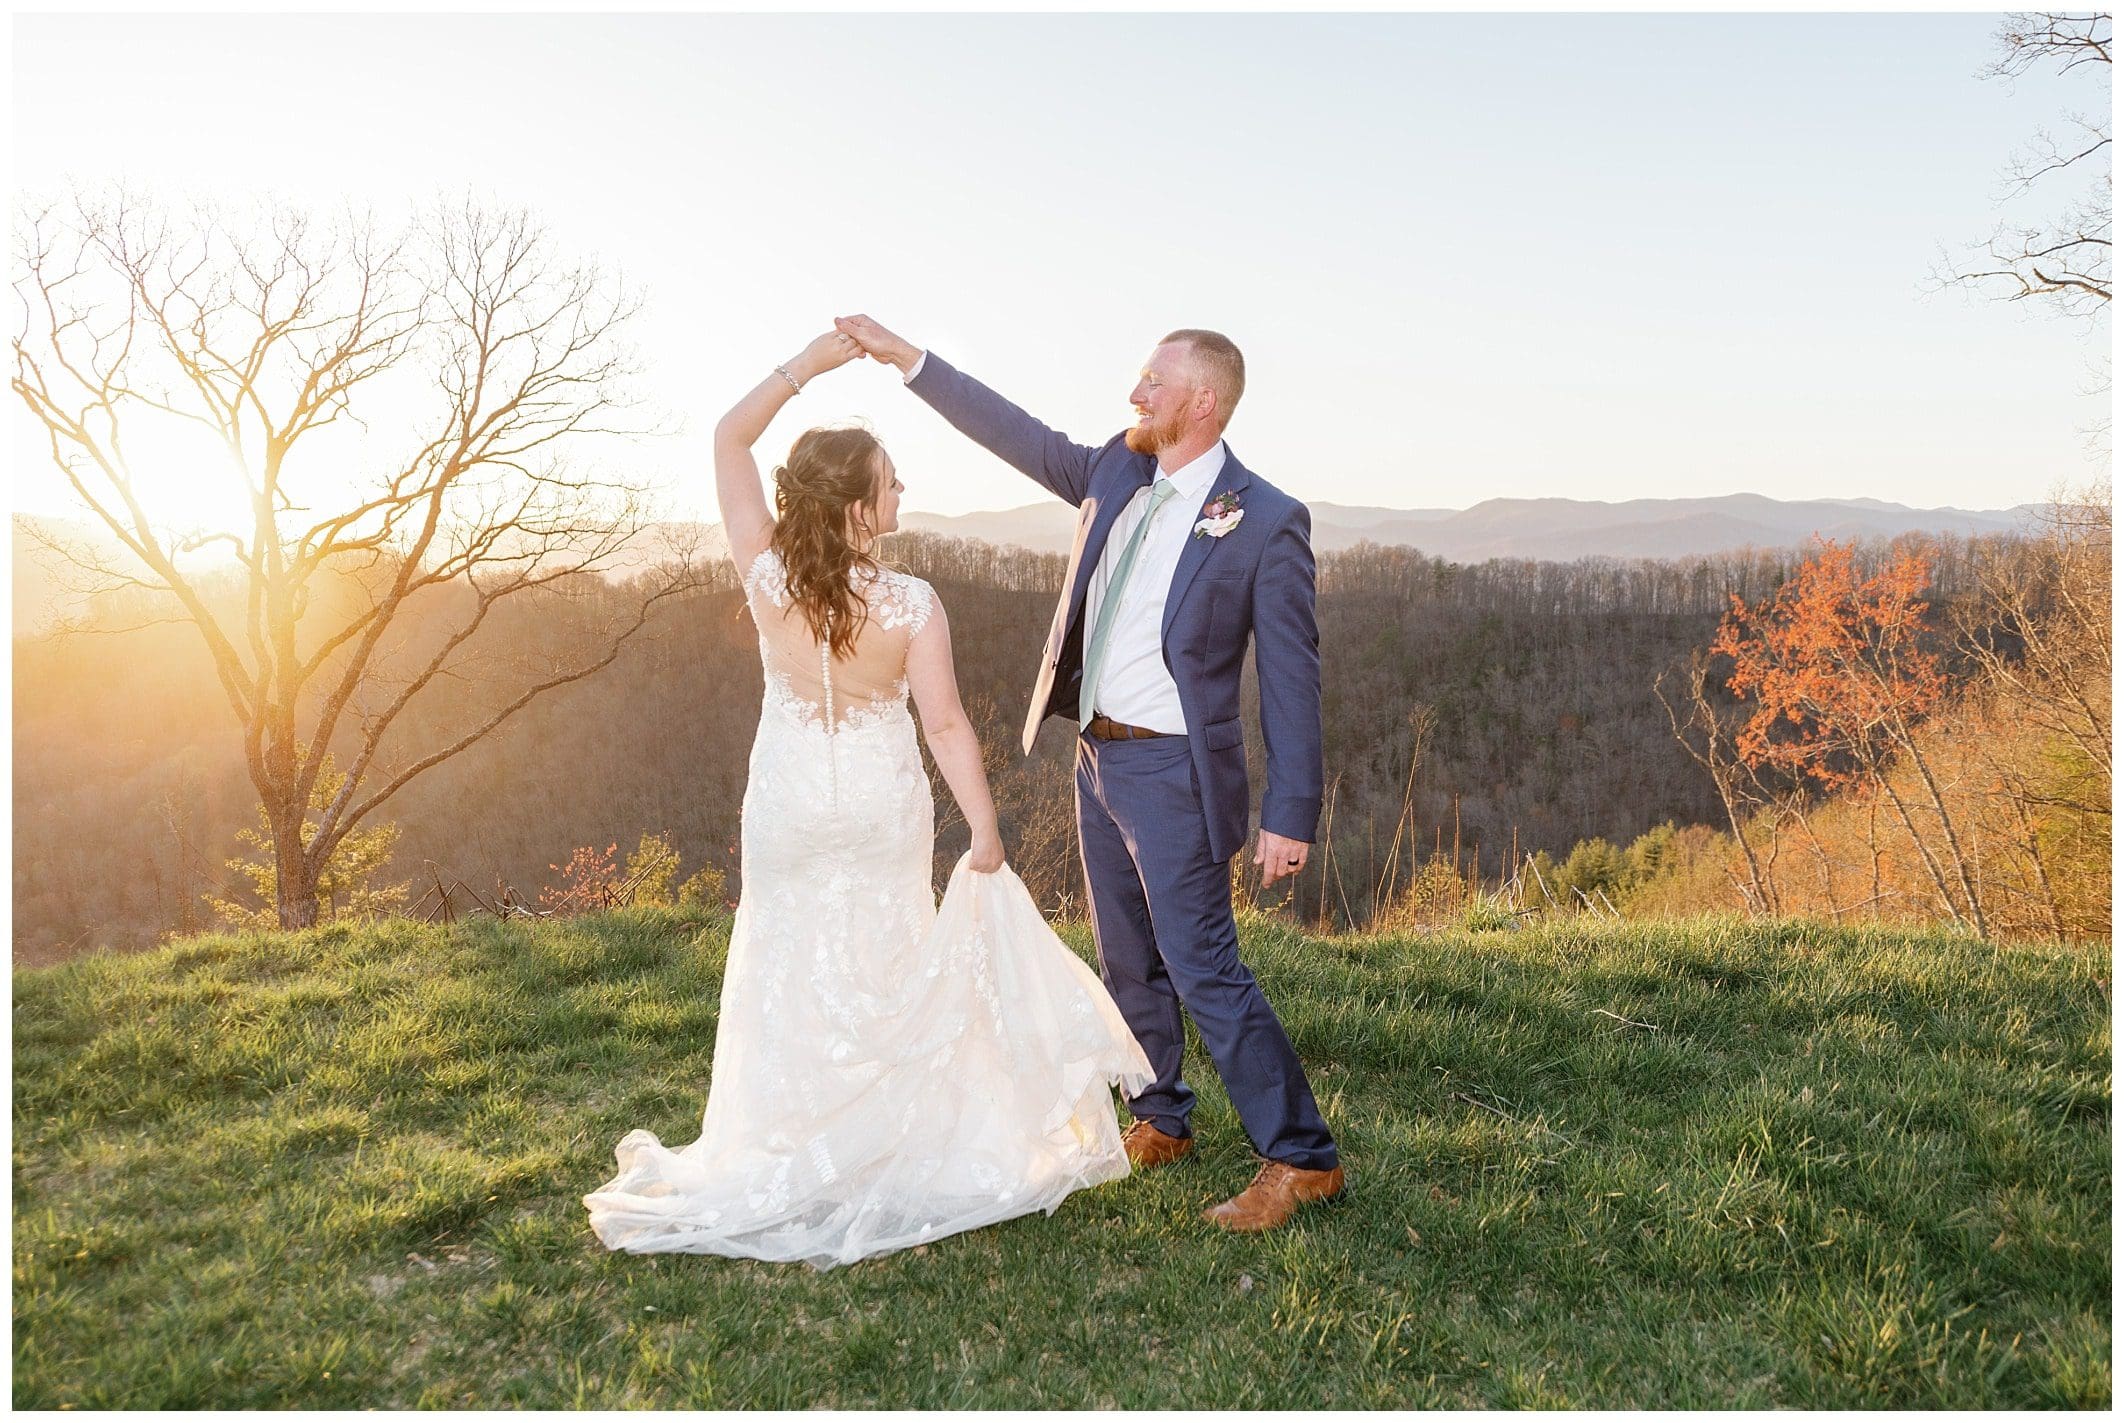 Sunset photos at parker mill venue with golden light while groom spins the bride